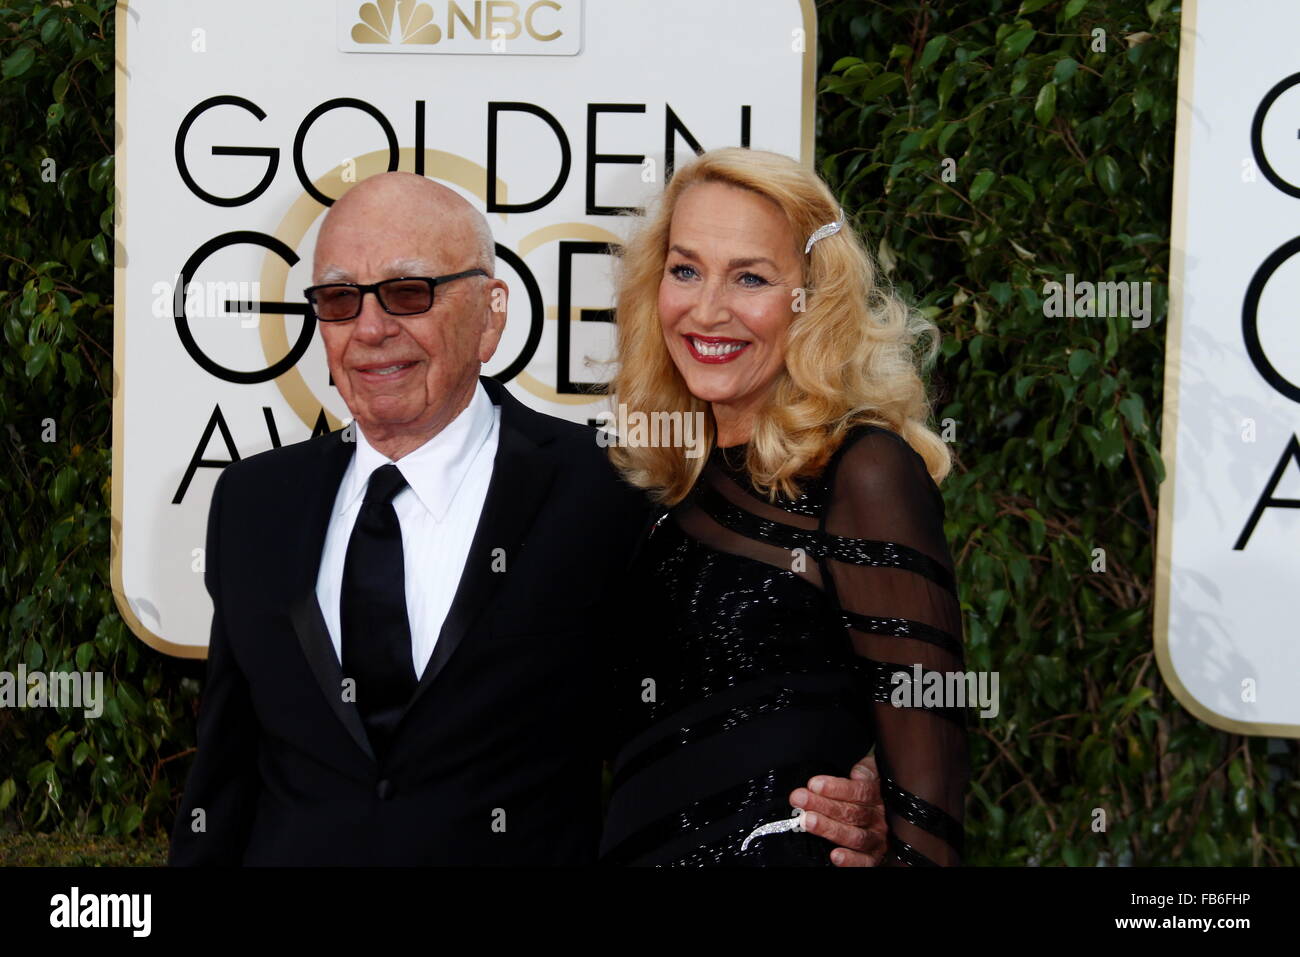 Beverly Hills, California, USA. 10th Jan, 2016. Rupert Murdoch and Jerry Hall arrive for the 73rd Annual Golden Globe Awards at the Beverly Hilton Hotel in Beverly Hills, California, USA, 10 January 2016. Photo: Hubert Boesl/dpa - NO WIRE SERVICE -/dpa/Alamy Live News Stock Photo